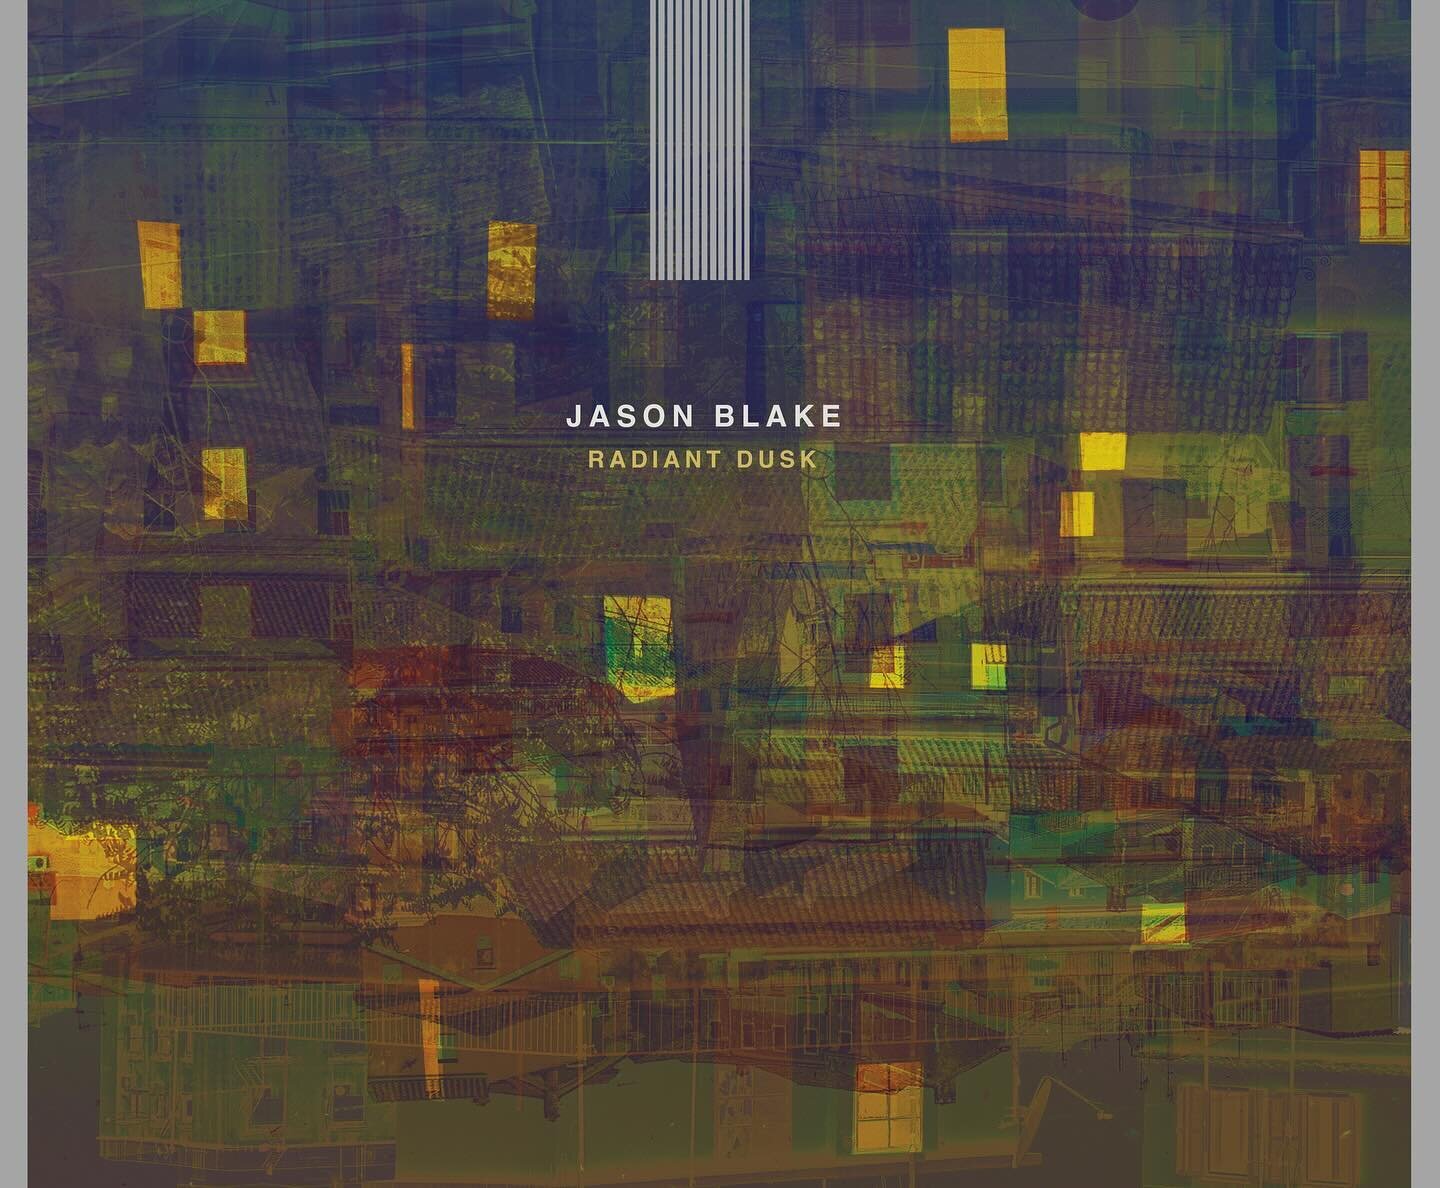 @jasonblakemusic has released an album of solo Warr guitar along with an accompanying EP that includes drums. Visit the Aziola Cry website for more details.